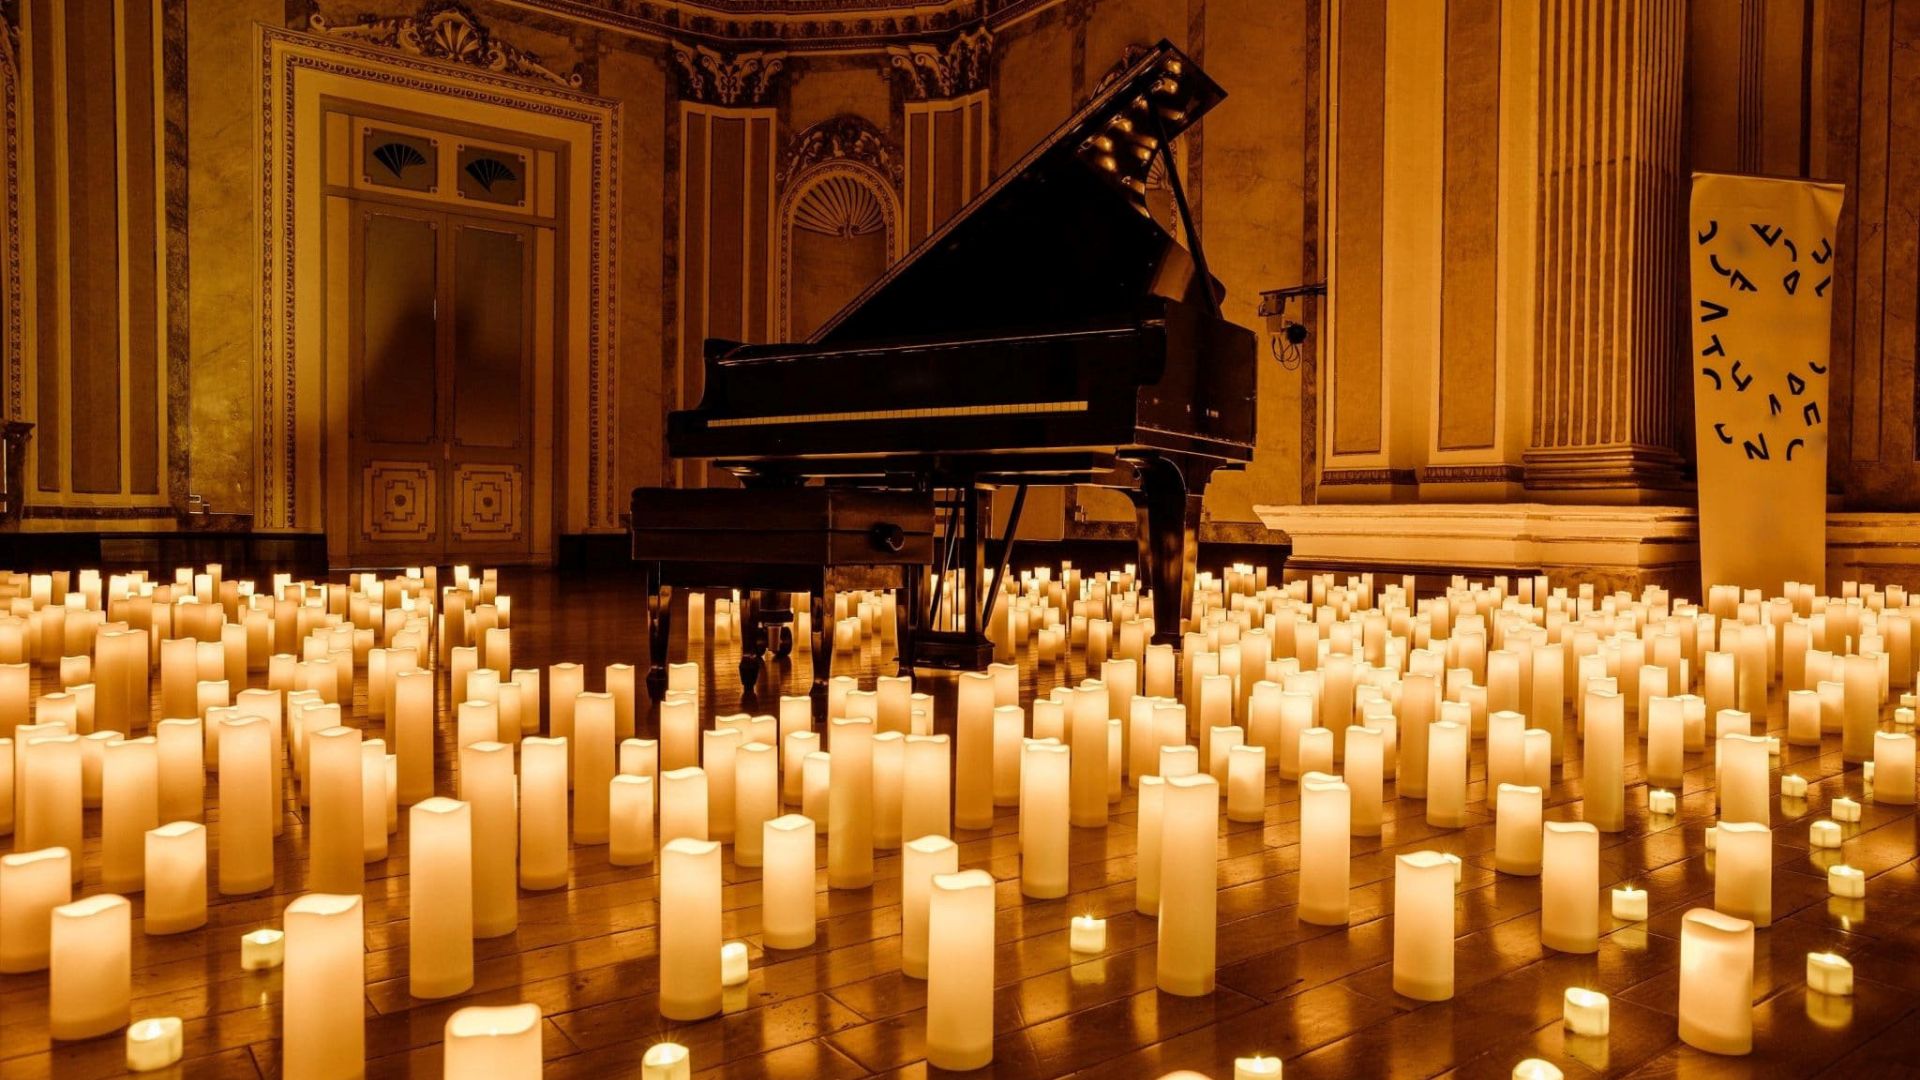 Piano surrounded by hundred of light candles